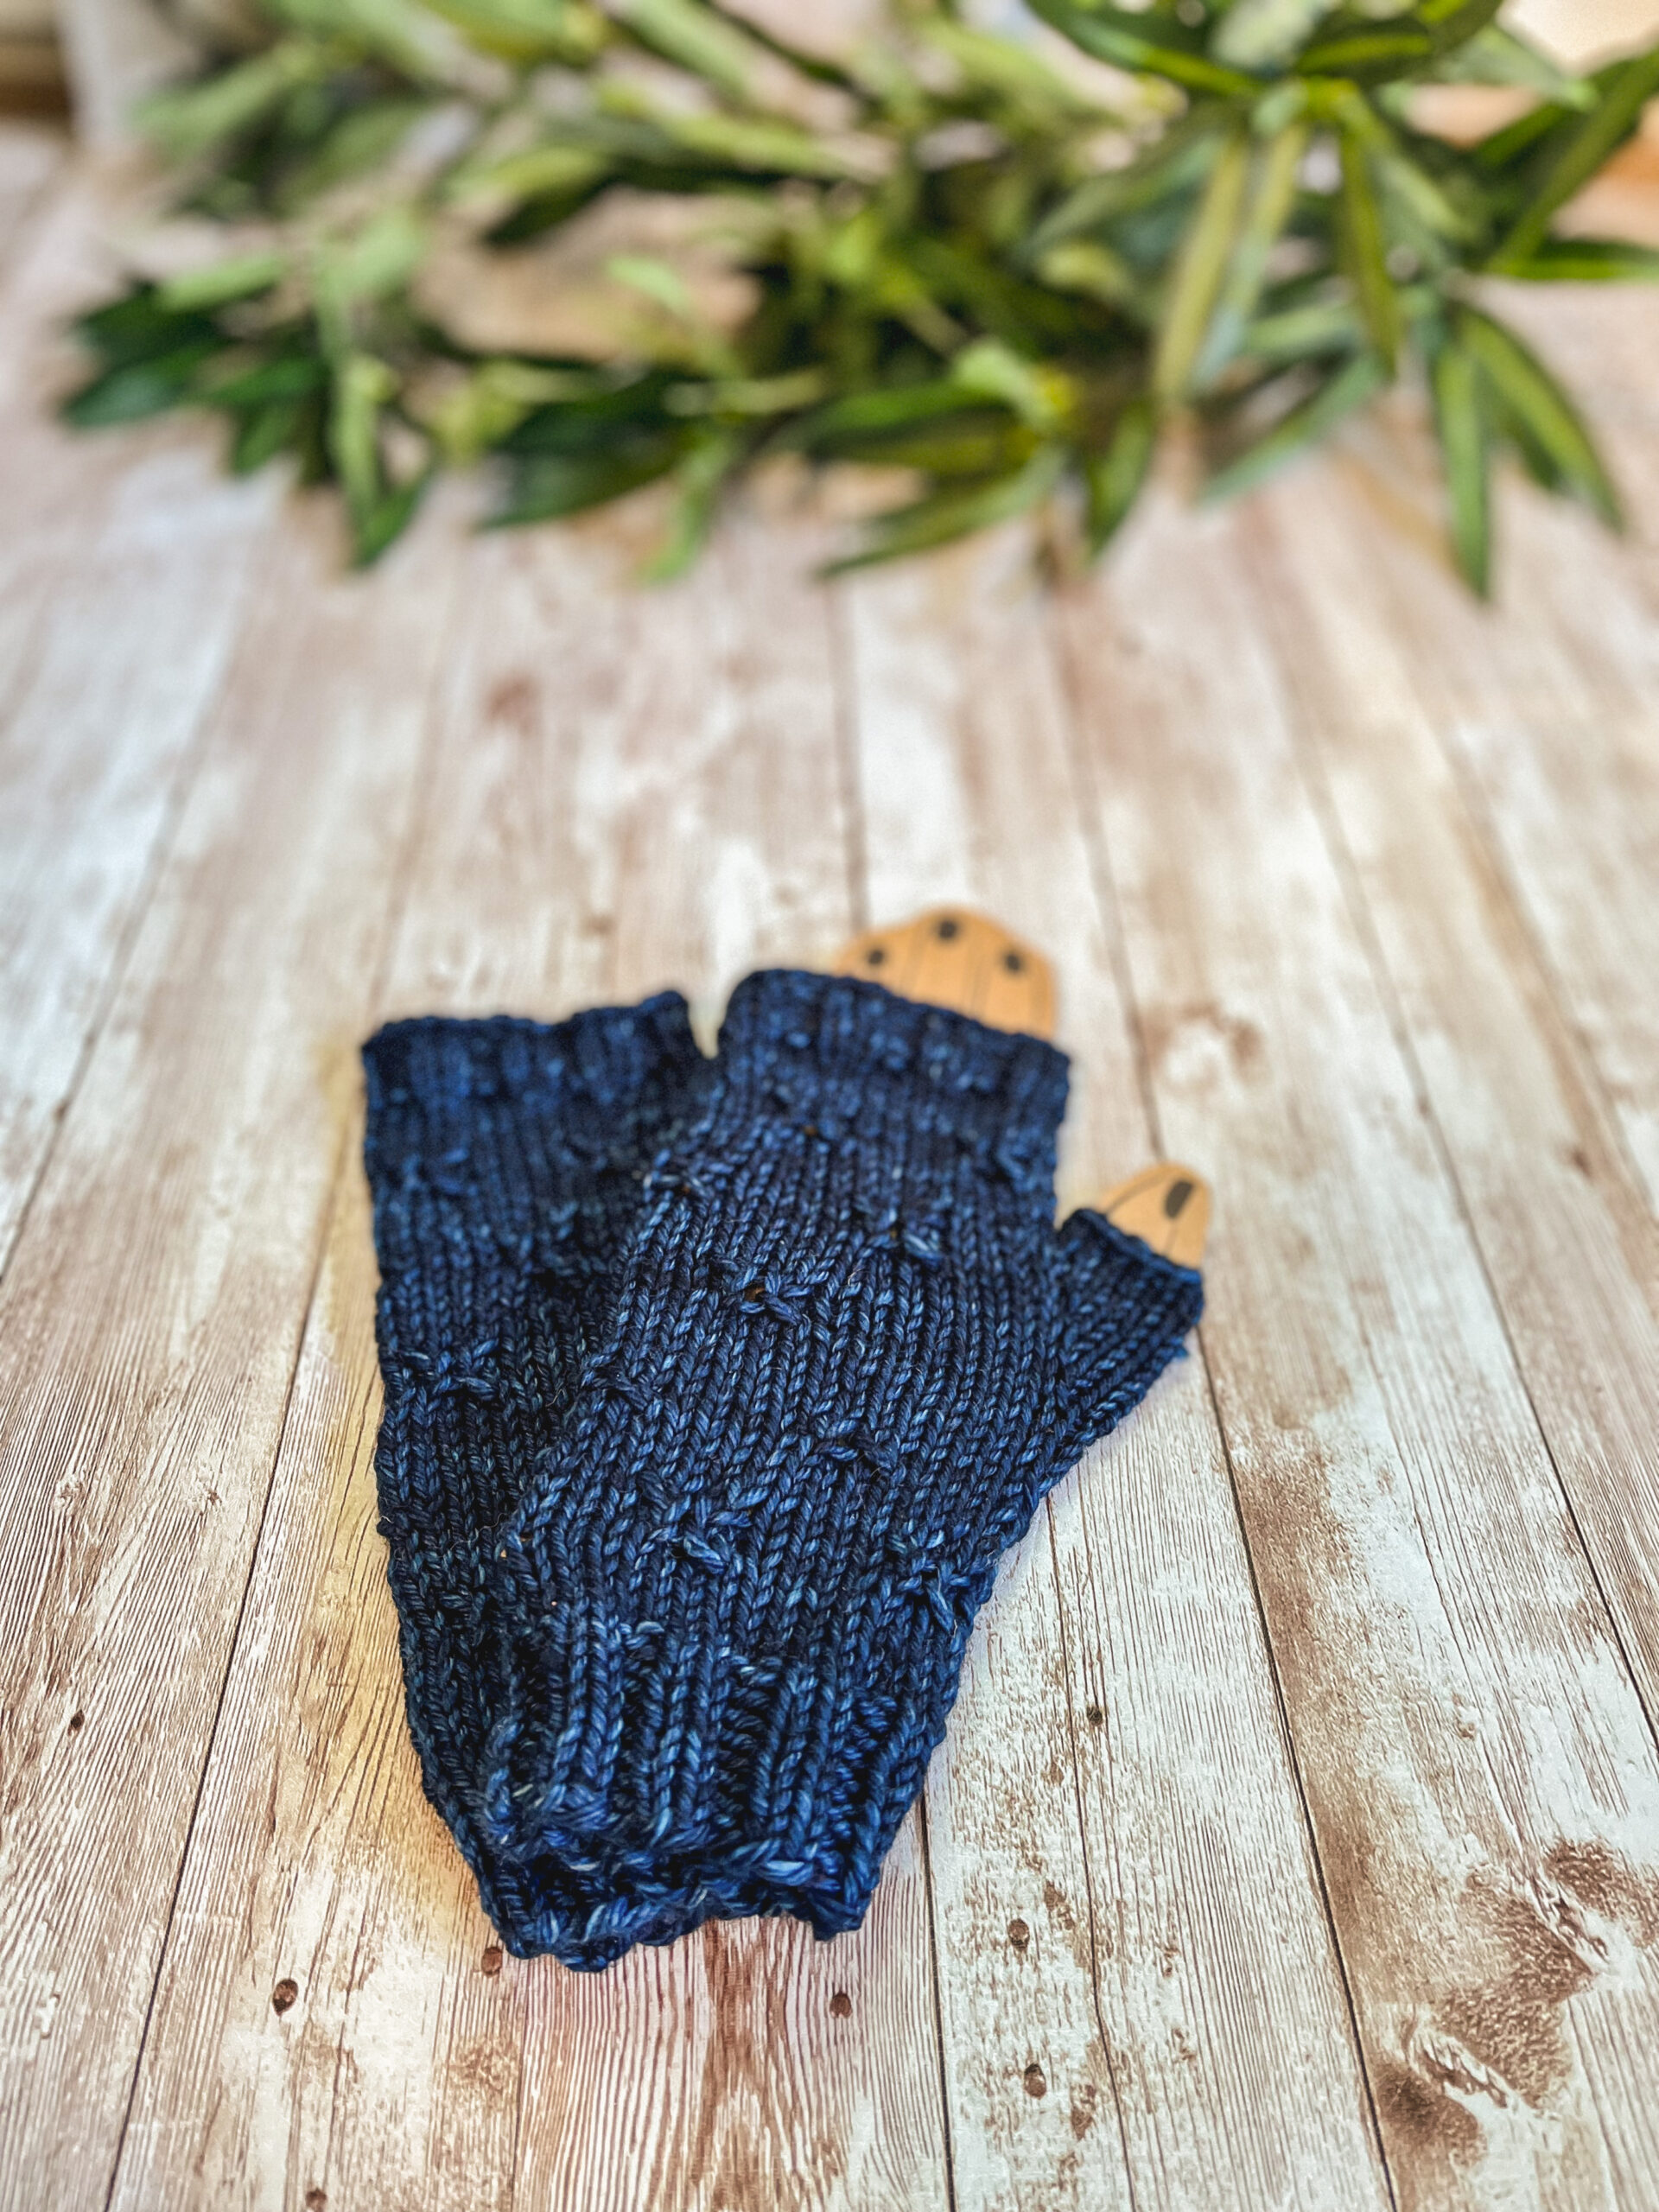 A pair of blue fingerless mitts with a decorative gathered pattern sit on a wood plank with greenery in the background